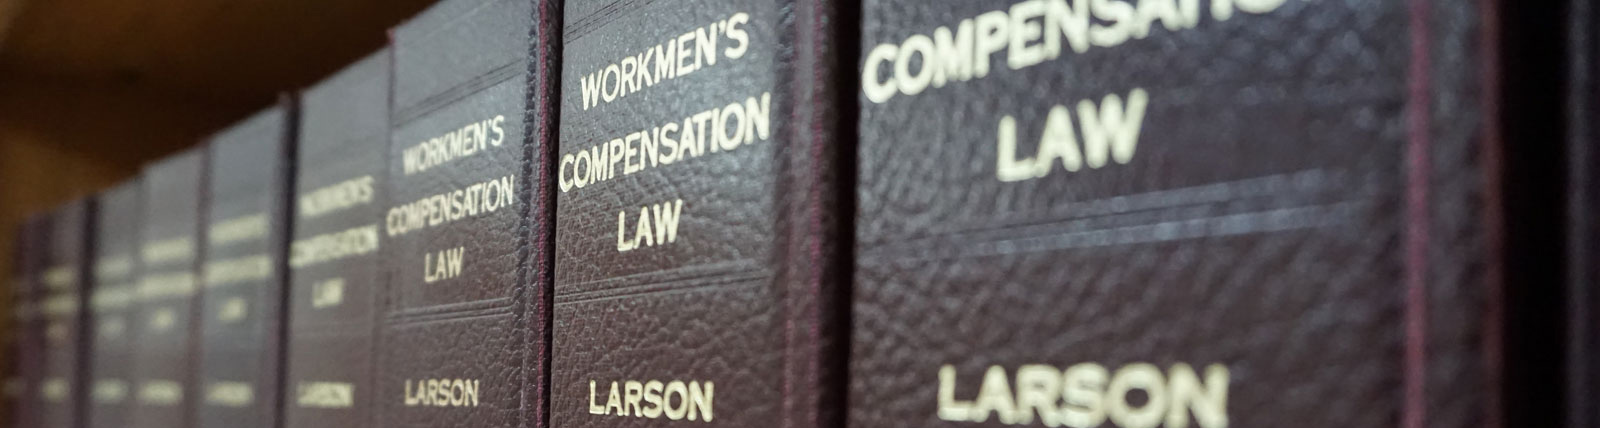 workers' compensation books 